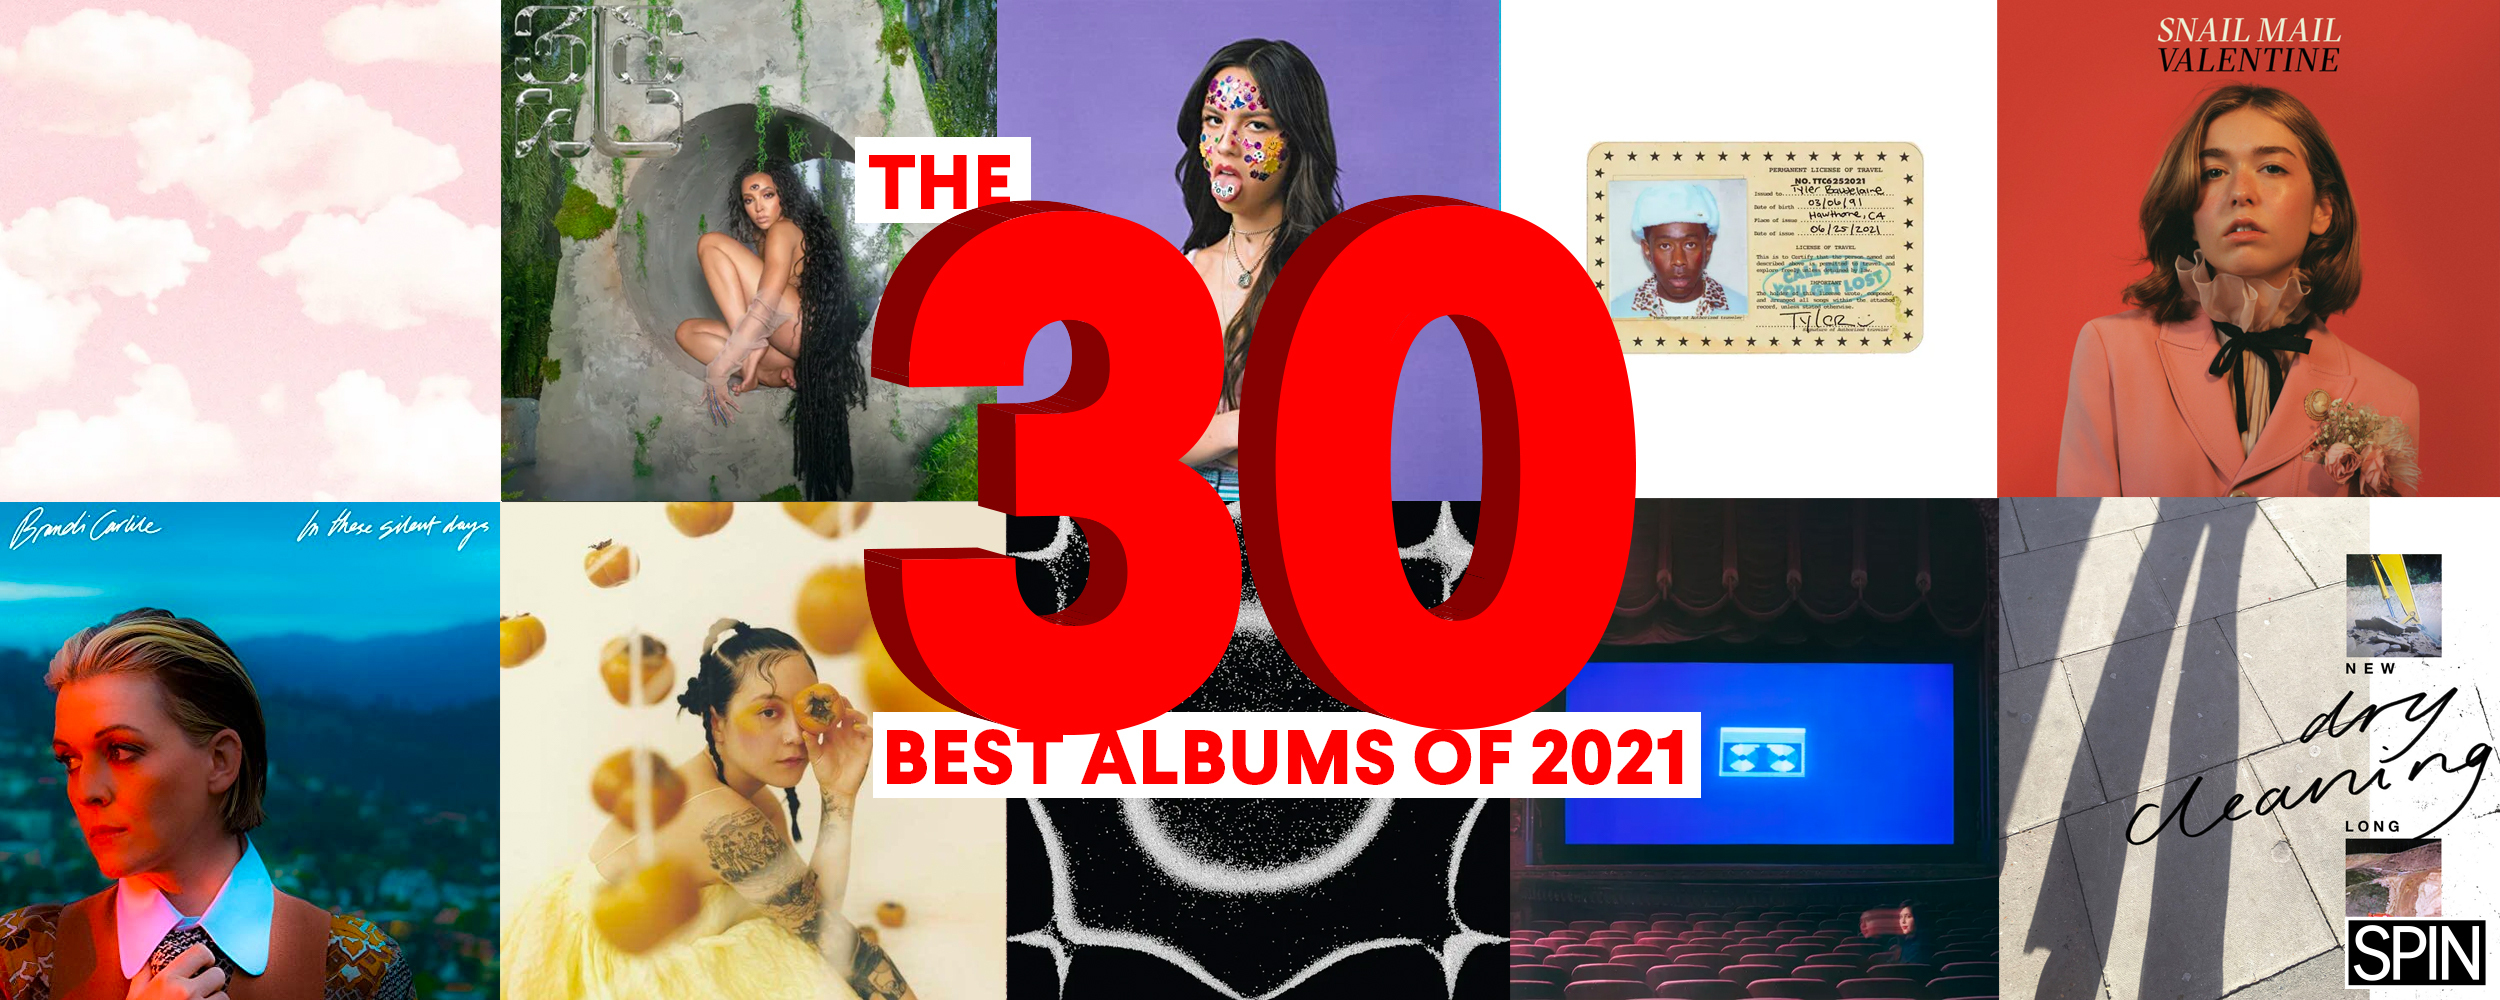 The 30 Best of 2021 - SPIN